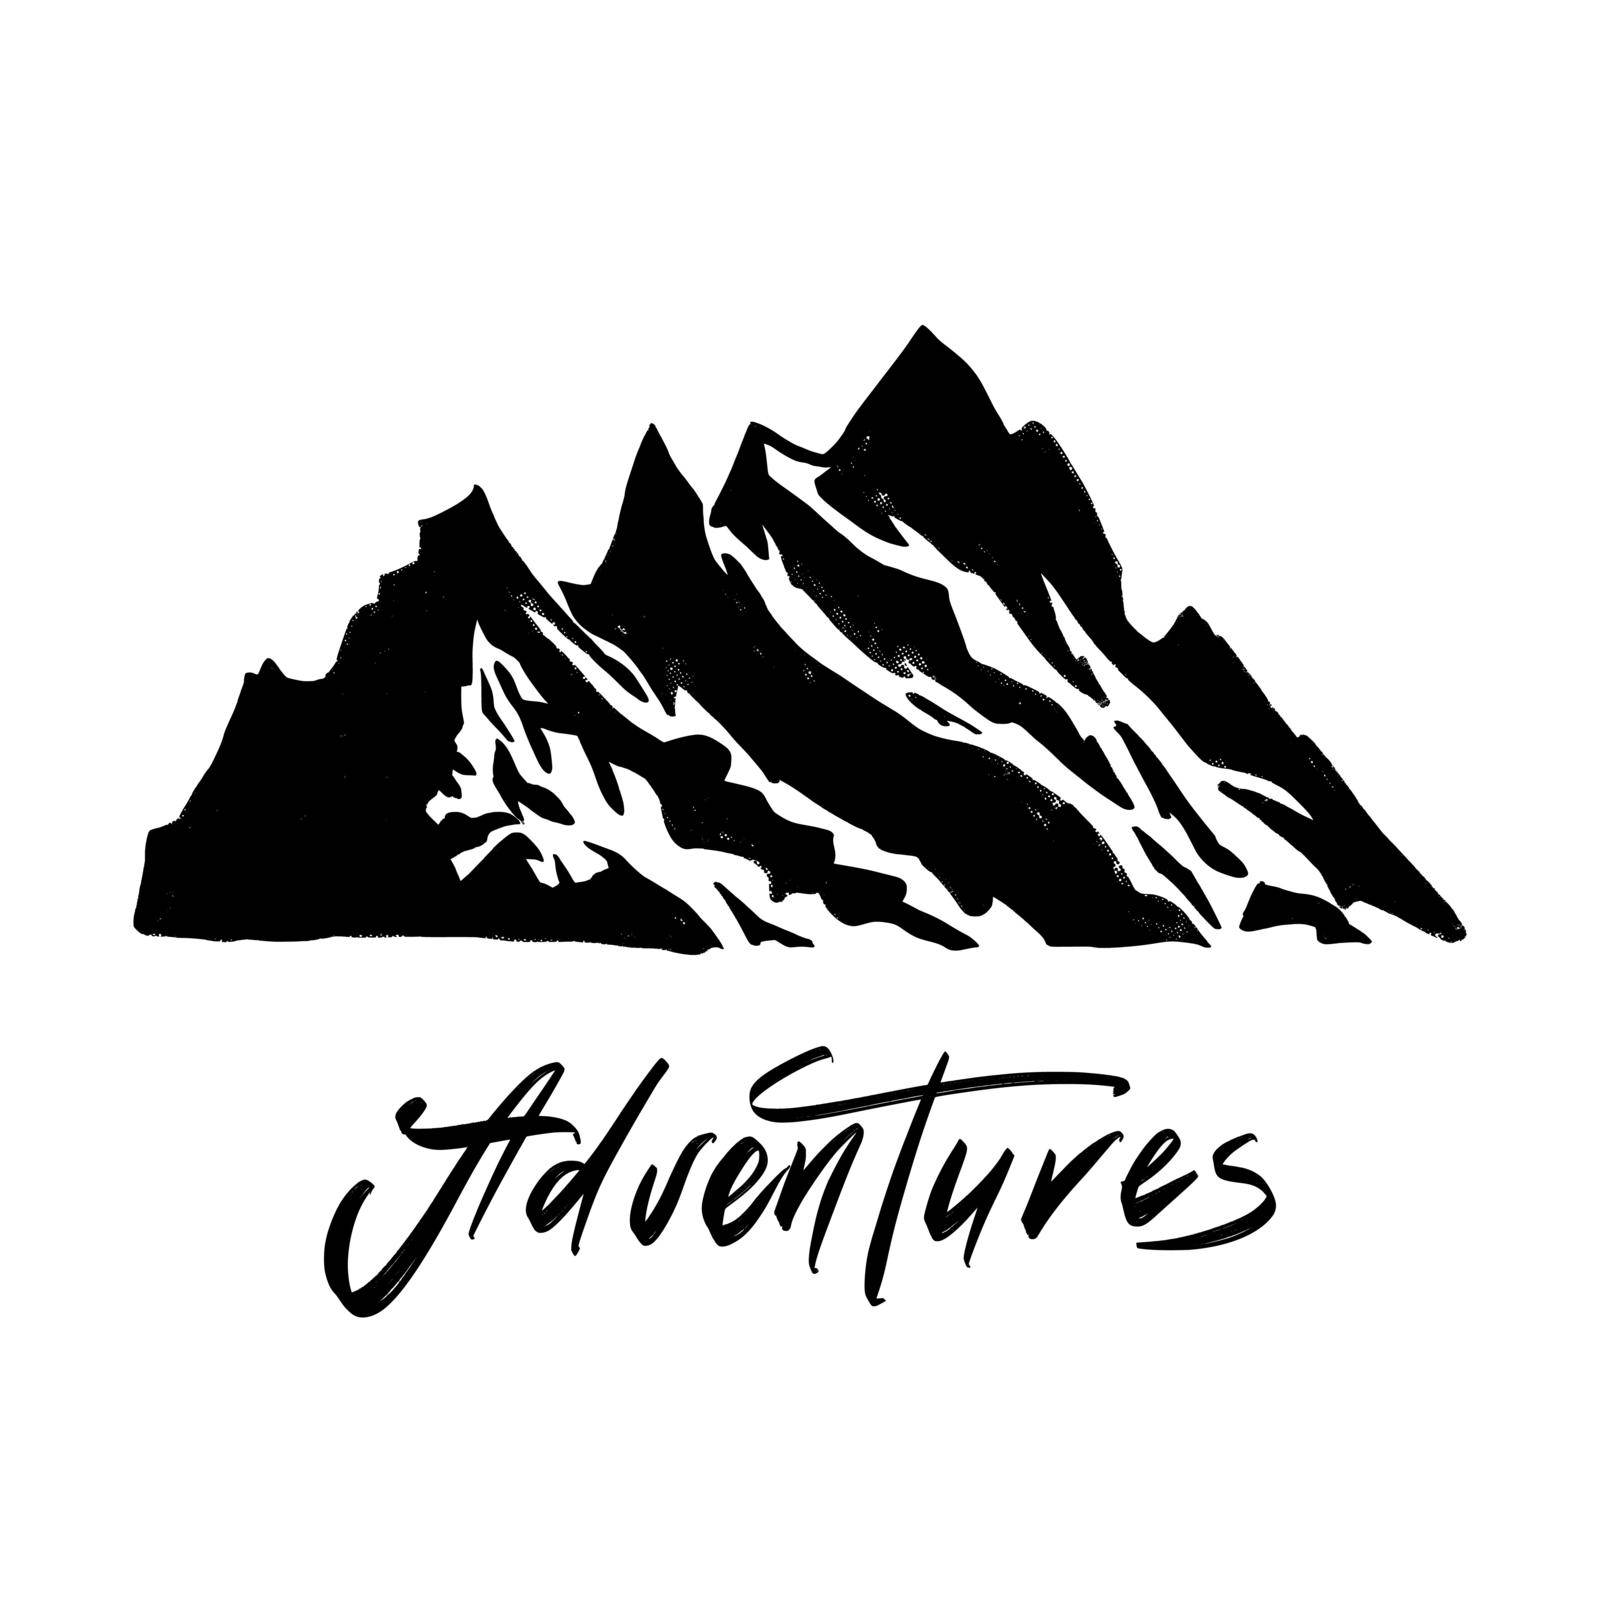 Hello New Adventures hand drawn grunge t-shirt print with mountains. Hiking and travelling vintage badge. Vector illustration